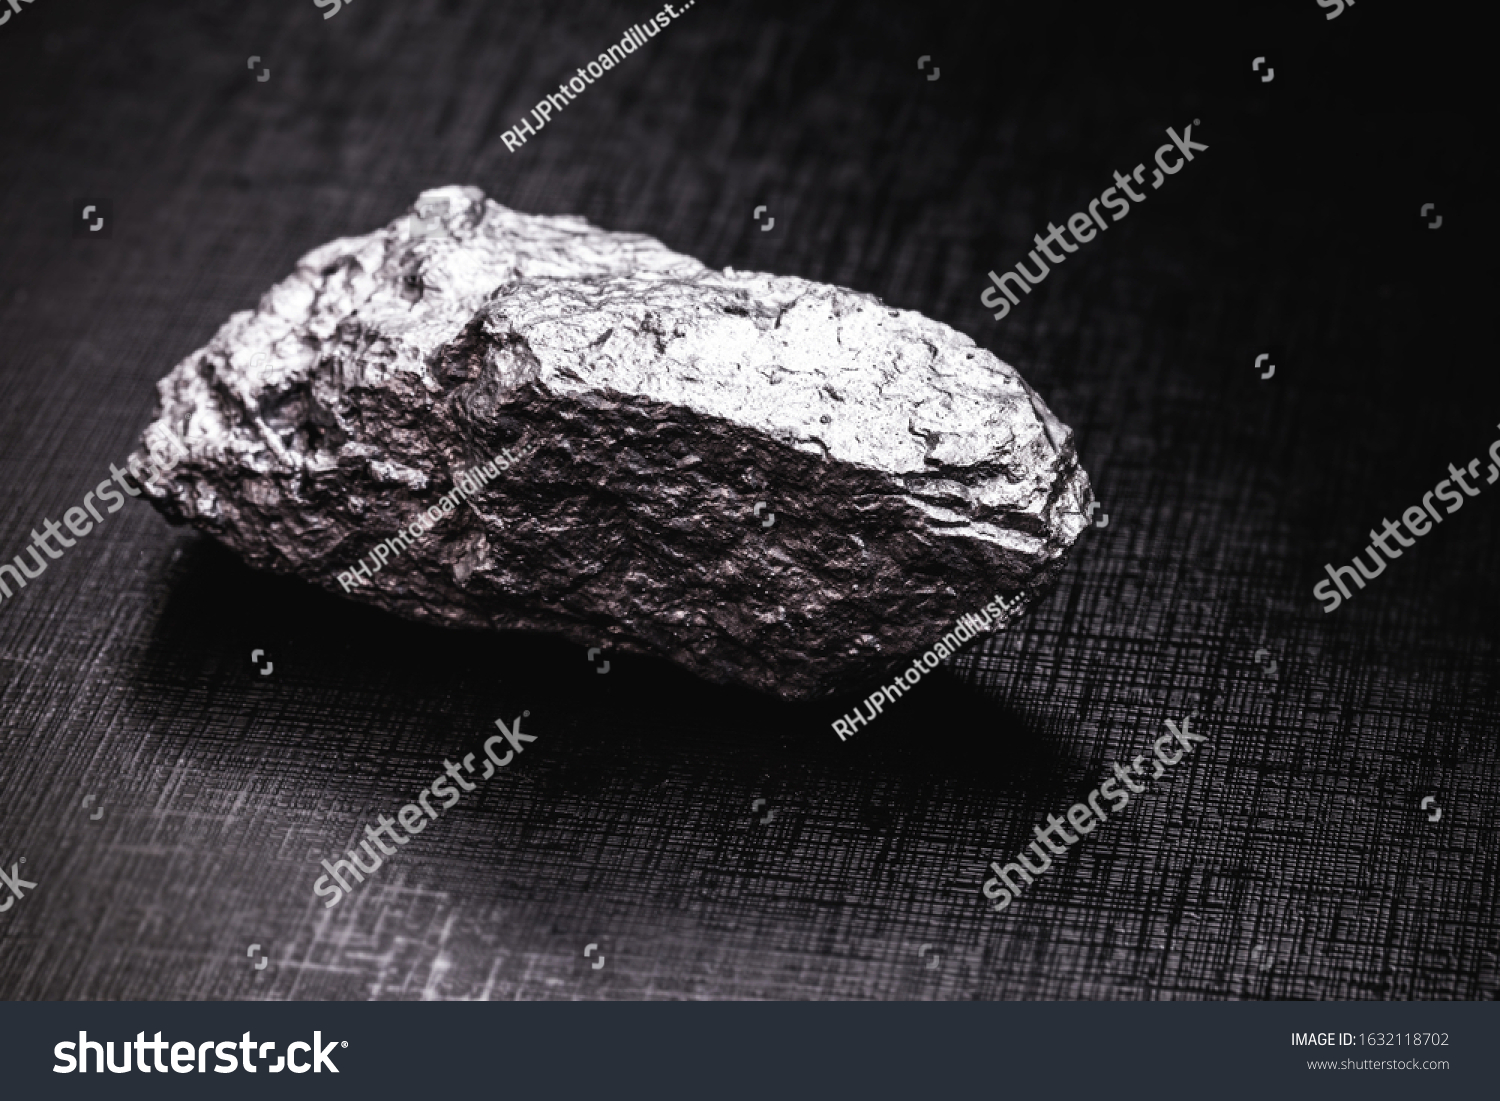 Palladium is a chemical element that at room temperature contracts in the solid state. Metal used in industry. Mineral extraction concept. #1632118702